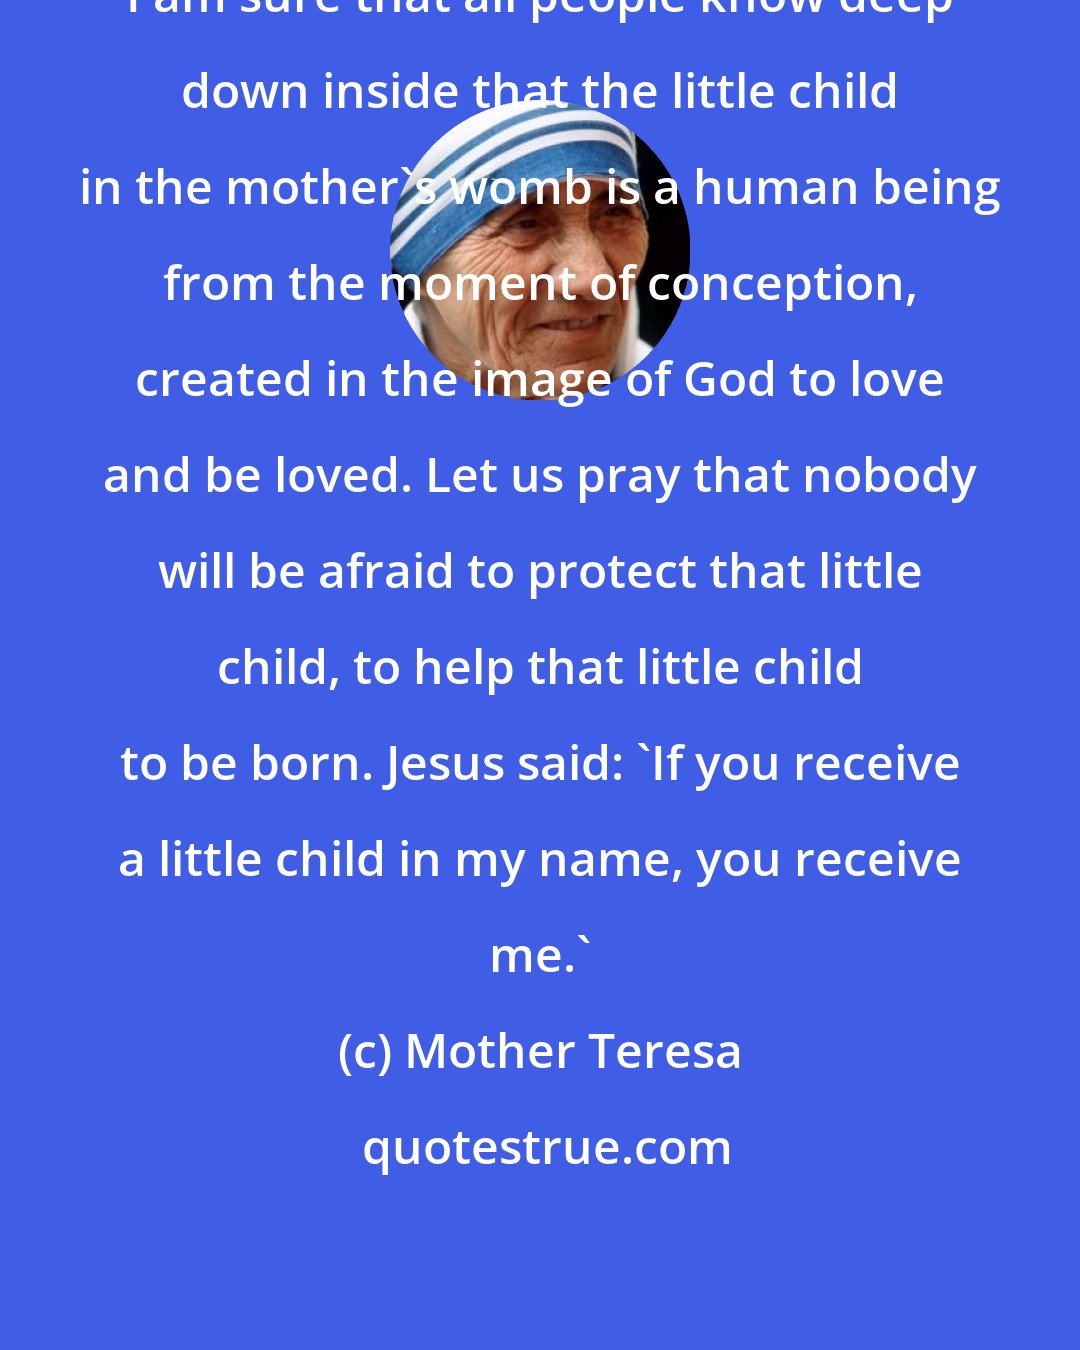 Mother Teresa: I am sure that all people know deep down inside that the little child in the mother's womb is a human being from the moment of conception, created in the image of God to love and be loved. Let us pray that nobody will be afraid to protect that little child, to help that little child to be born. Jesus said: 'If you receive a little child in my name, you receive me.'